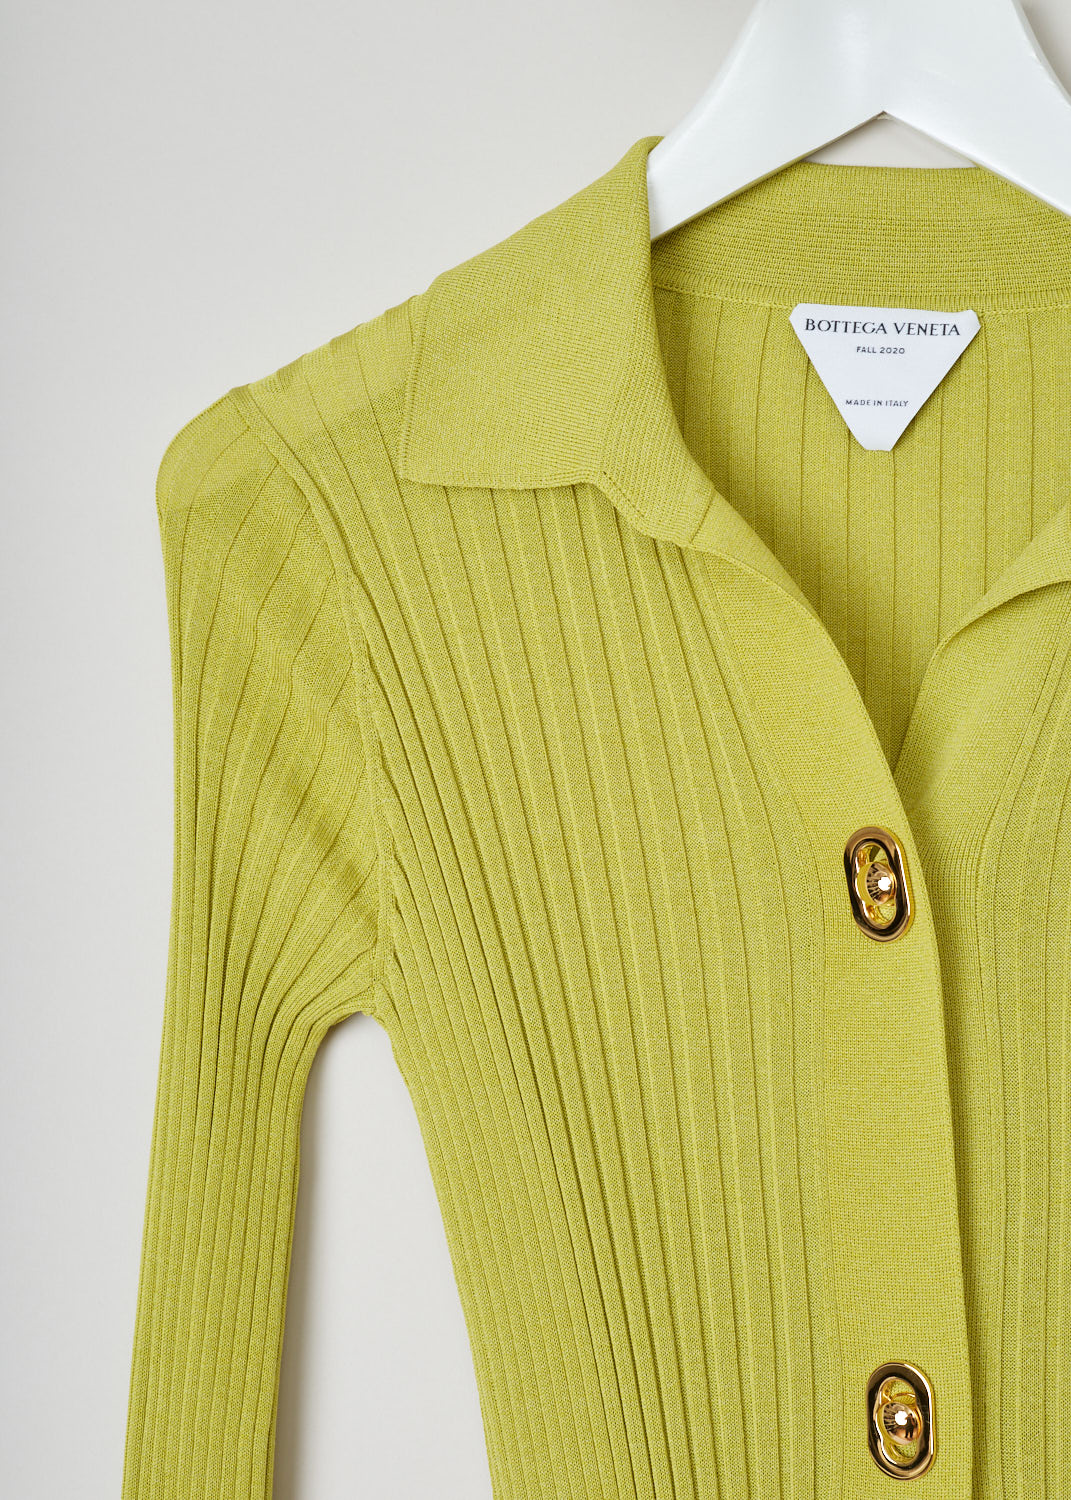 Bottega Veneta, Yellow ribbed blouse dress, 637824_V06P0_7275, yellow, detail, Skin tight blouse dress featuring a ribbed weaving pattern, pointed collar and long cuffed sleeves supporting a single button. The fastening option on this model are the decorative press buttons on the front. 